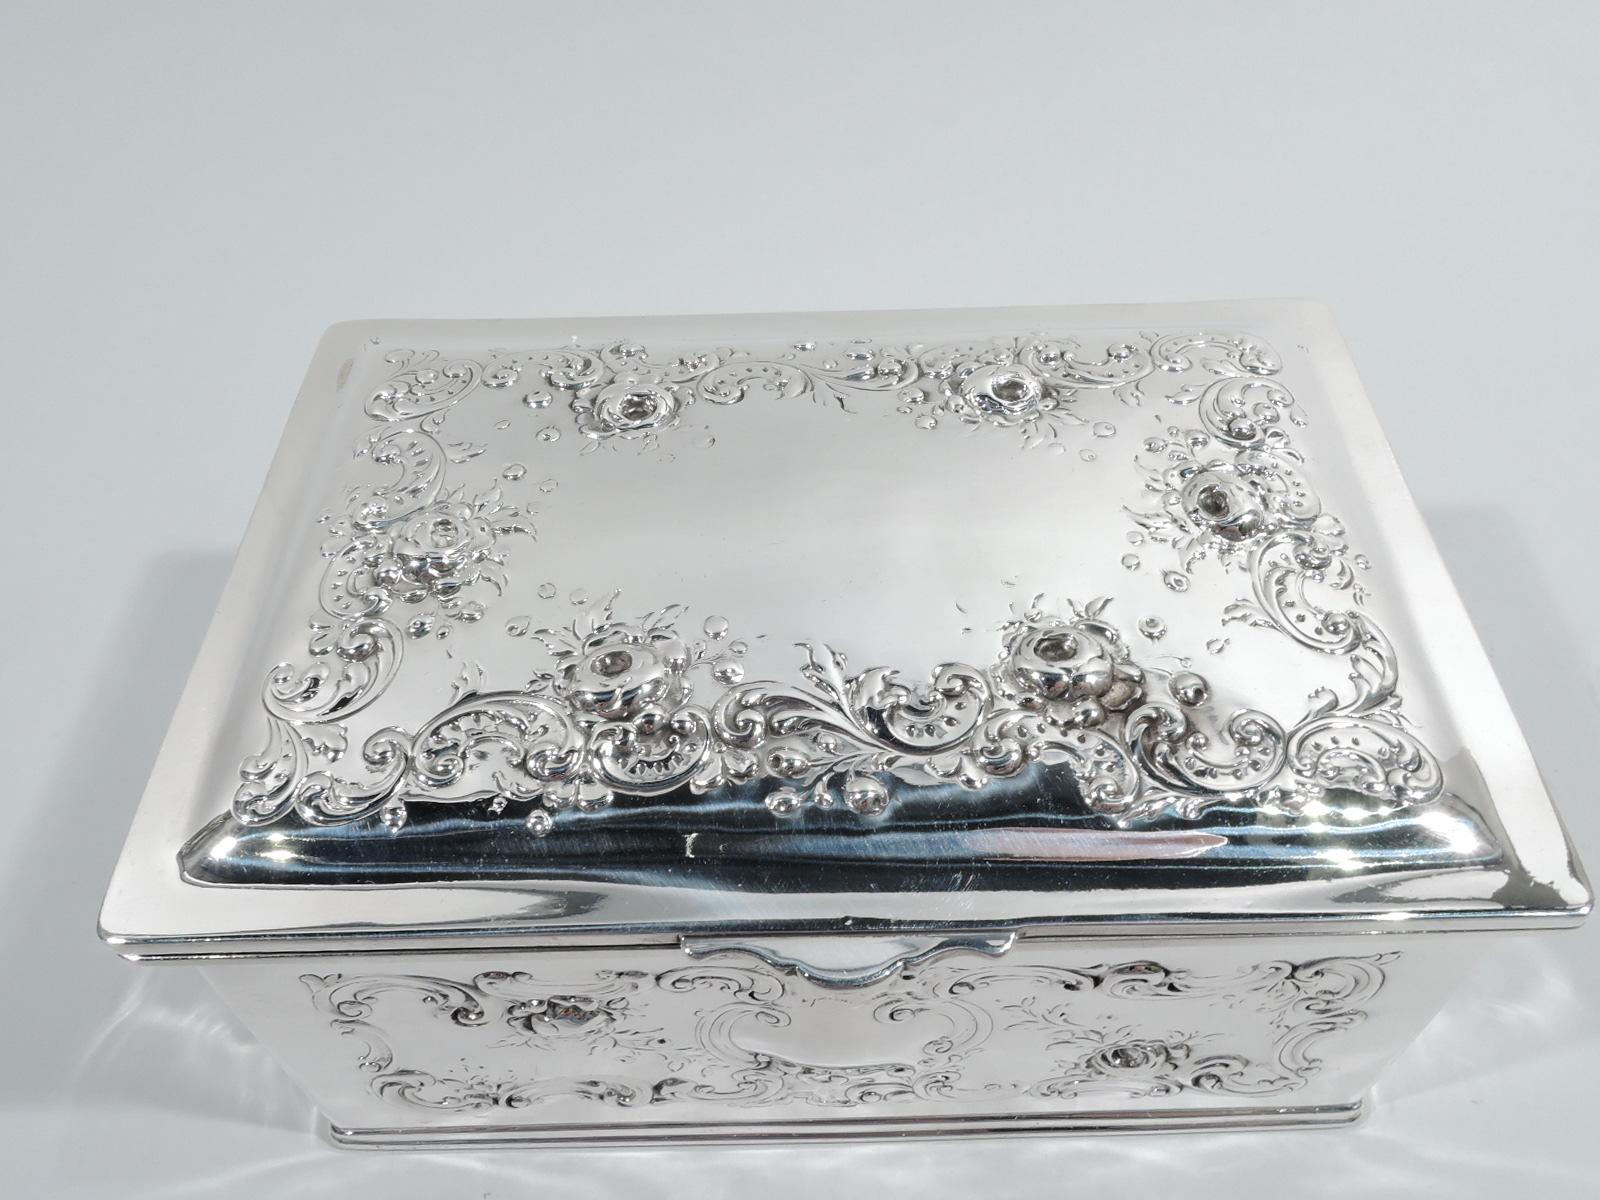 Edwardian sterling silver keepsake casket. Made by Gorham in Providence in 1899. Rectangular with straight sides. Cover hinged and gently raised with scrolled tab. Chased scrolls and flowers. Front has vacant scrolled cartouche. Cover top center